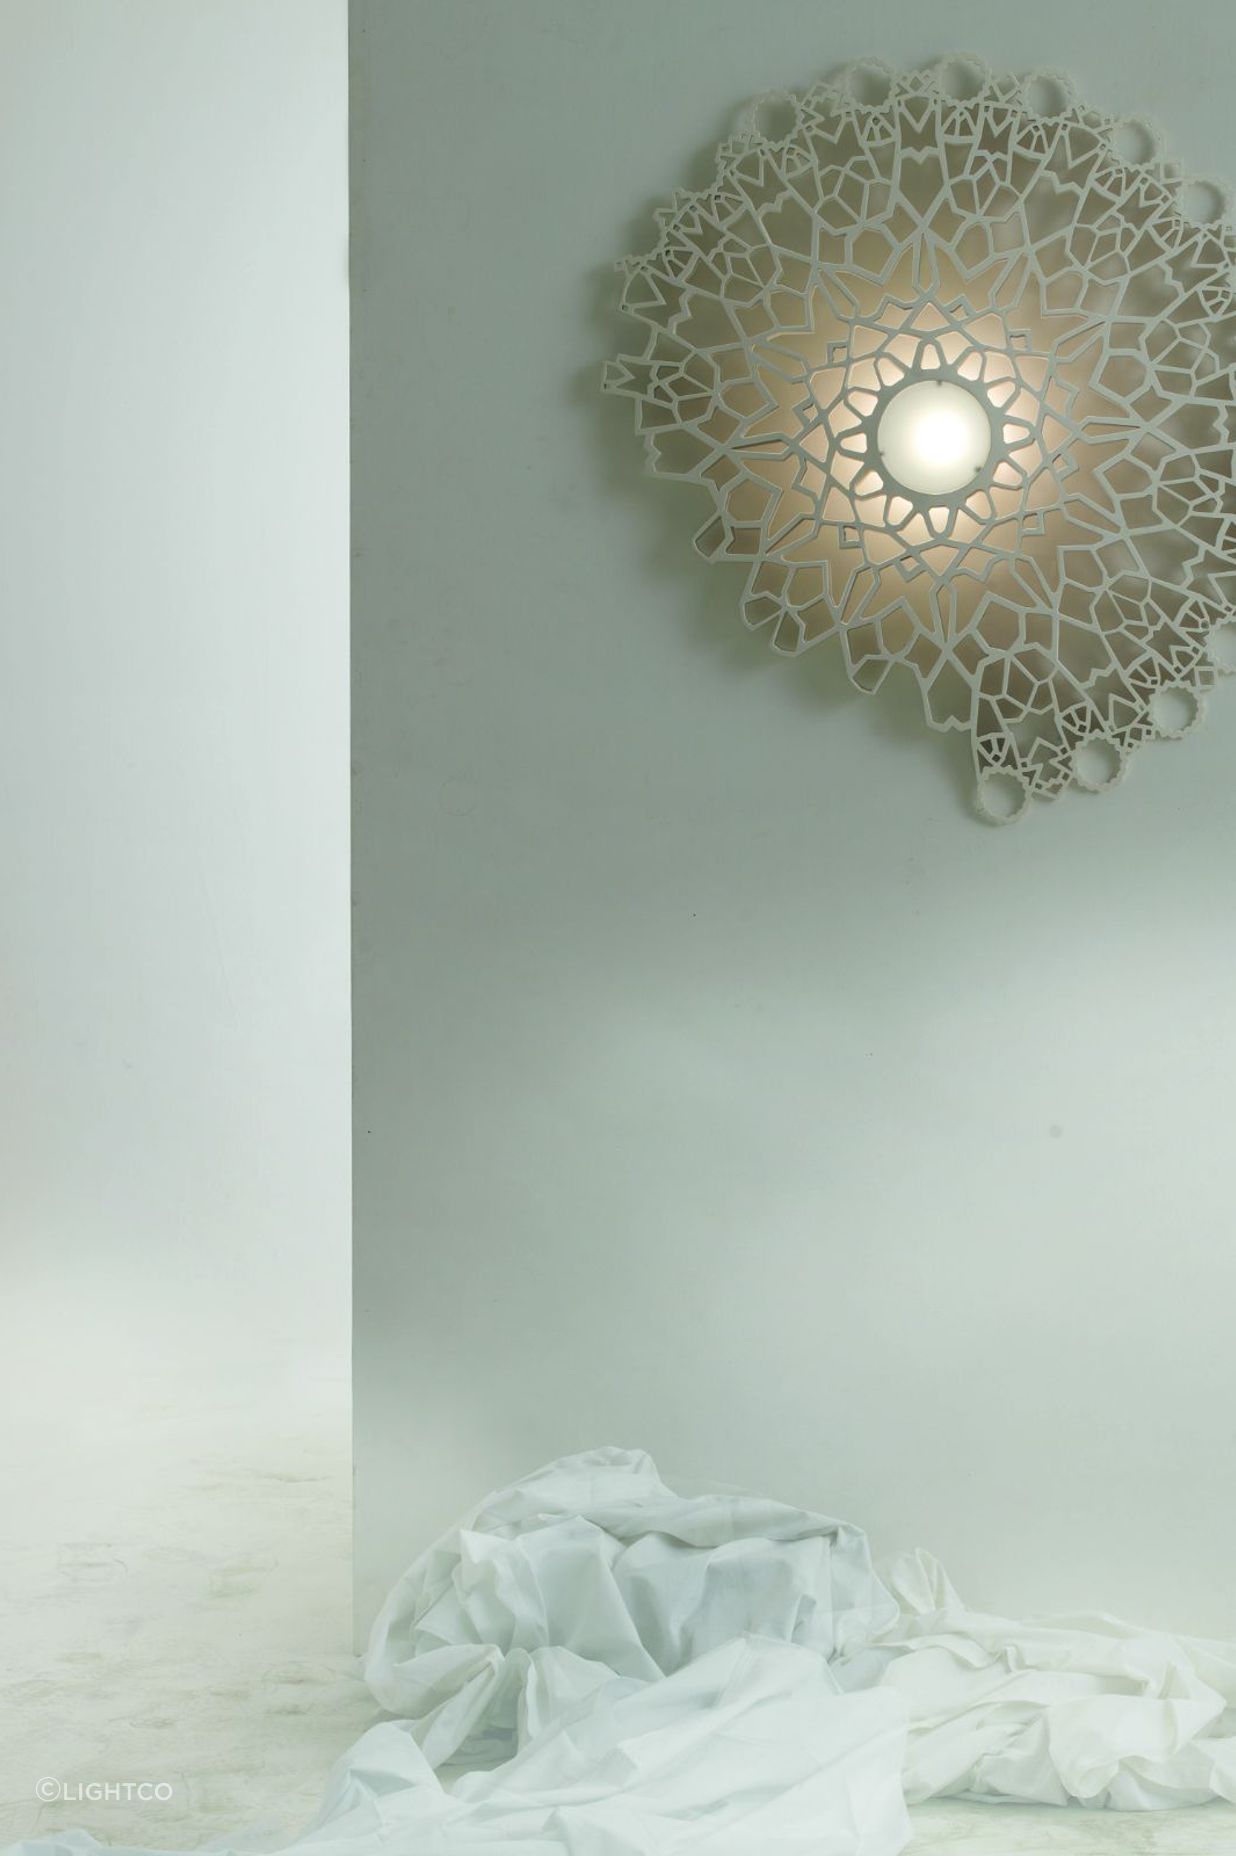 The mesmerising Notredame Wall/Ceiling Light by Karman from LightCo